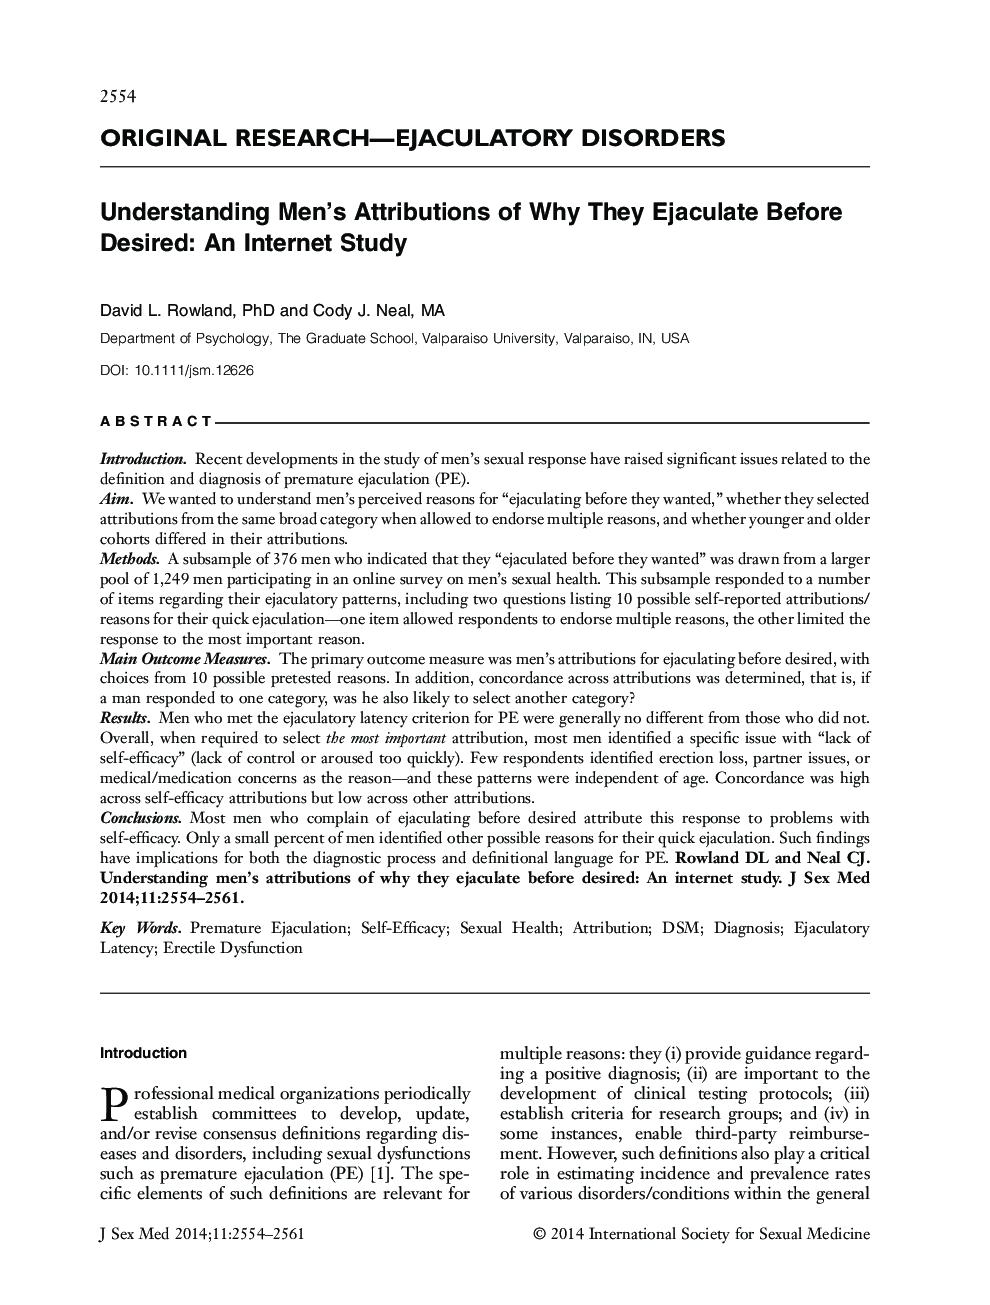 Understanding Men's Attributions of Why They Ejaculate Before Desired: An Internet Study